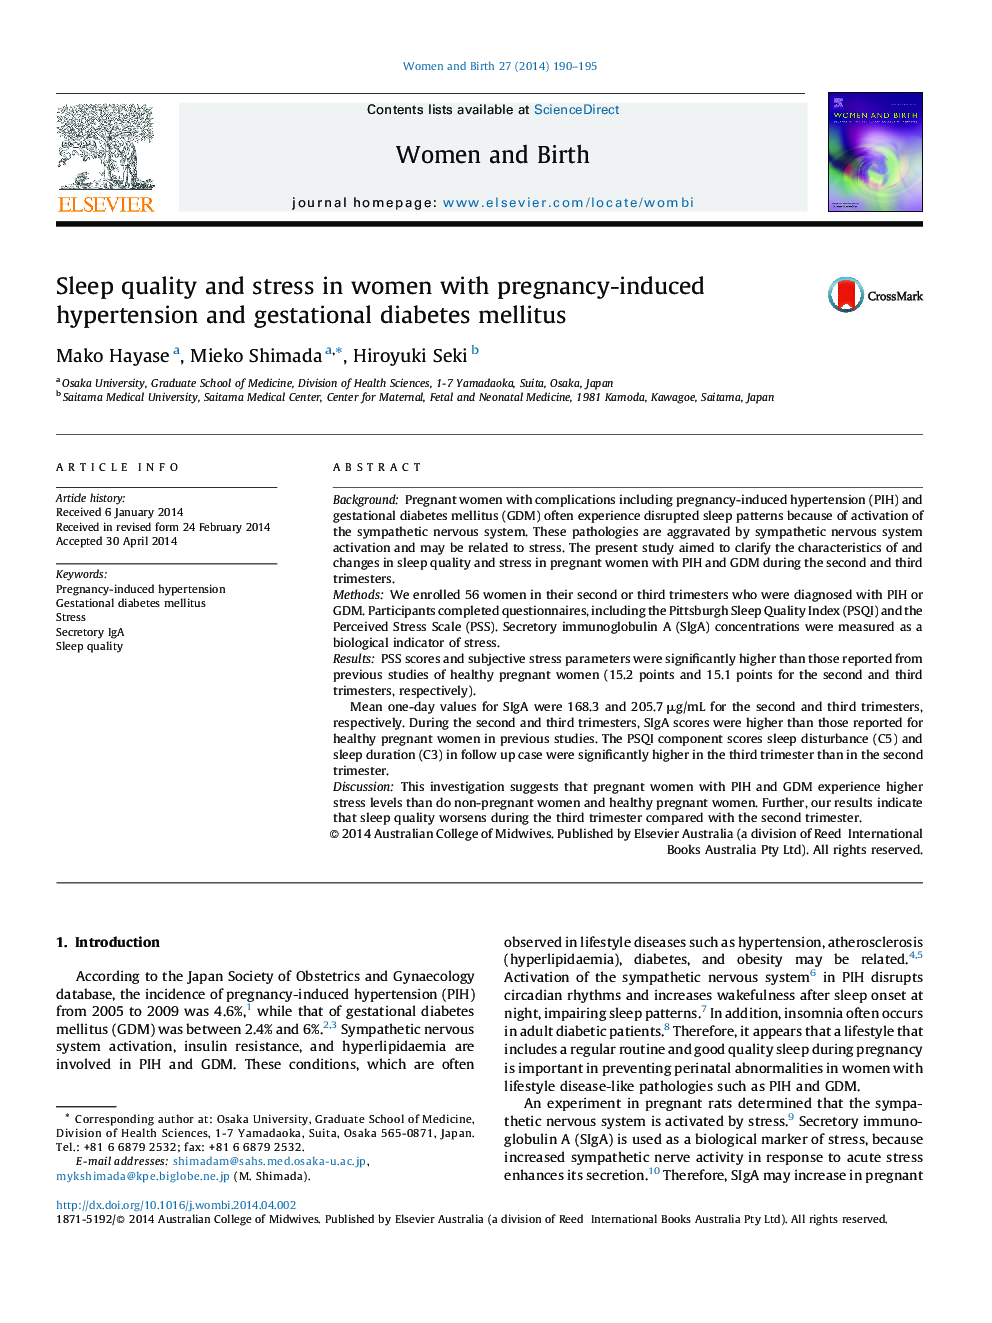 Sleep quality and stress in women with pregnancy-induced hypertension and gestational diabetes mellitus